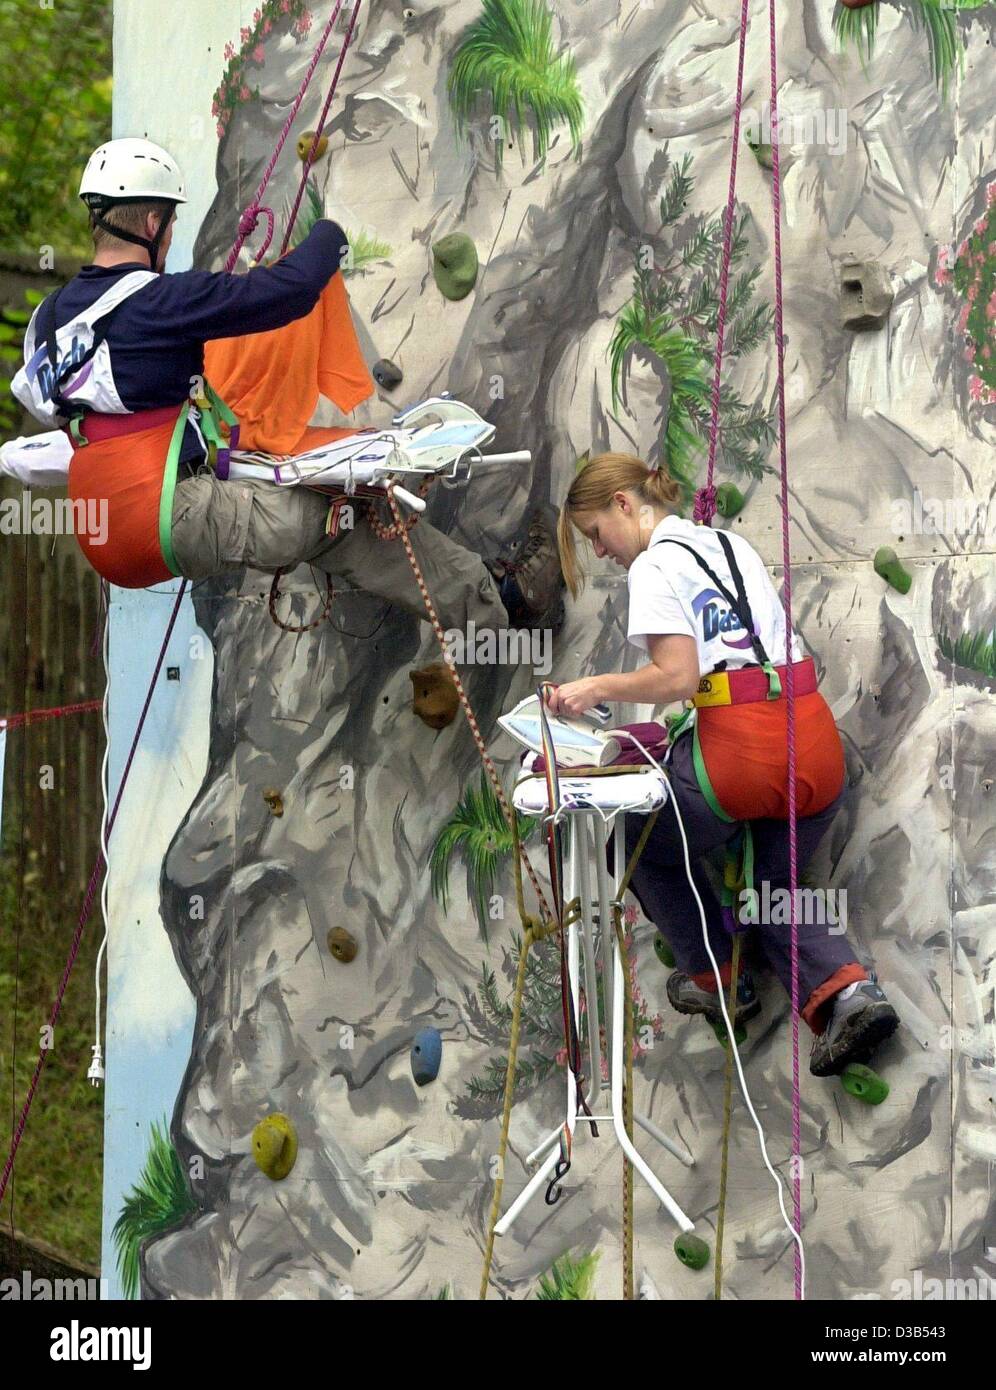 (dpa) - Ironing as fun and challenge: Two participants in the first extreme ironing world championships are pressing laundry as they are hanging in a climbing wall near Valley, Bavaria, 21 September 2002. The championships consist of five disciplines including forest, urban, freestyle and rocky with Stock Photo